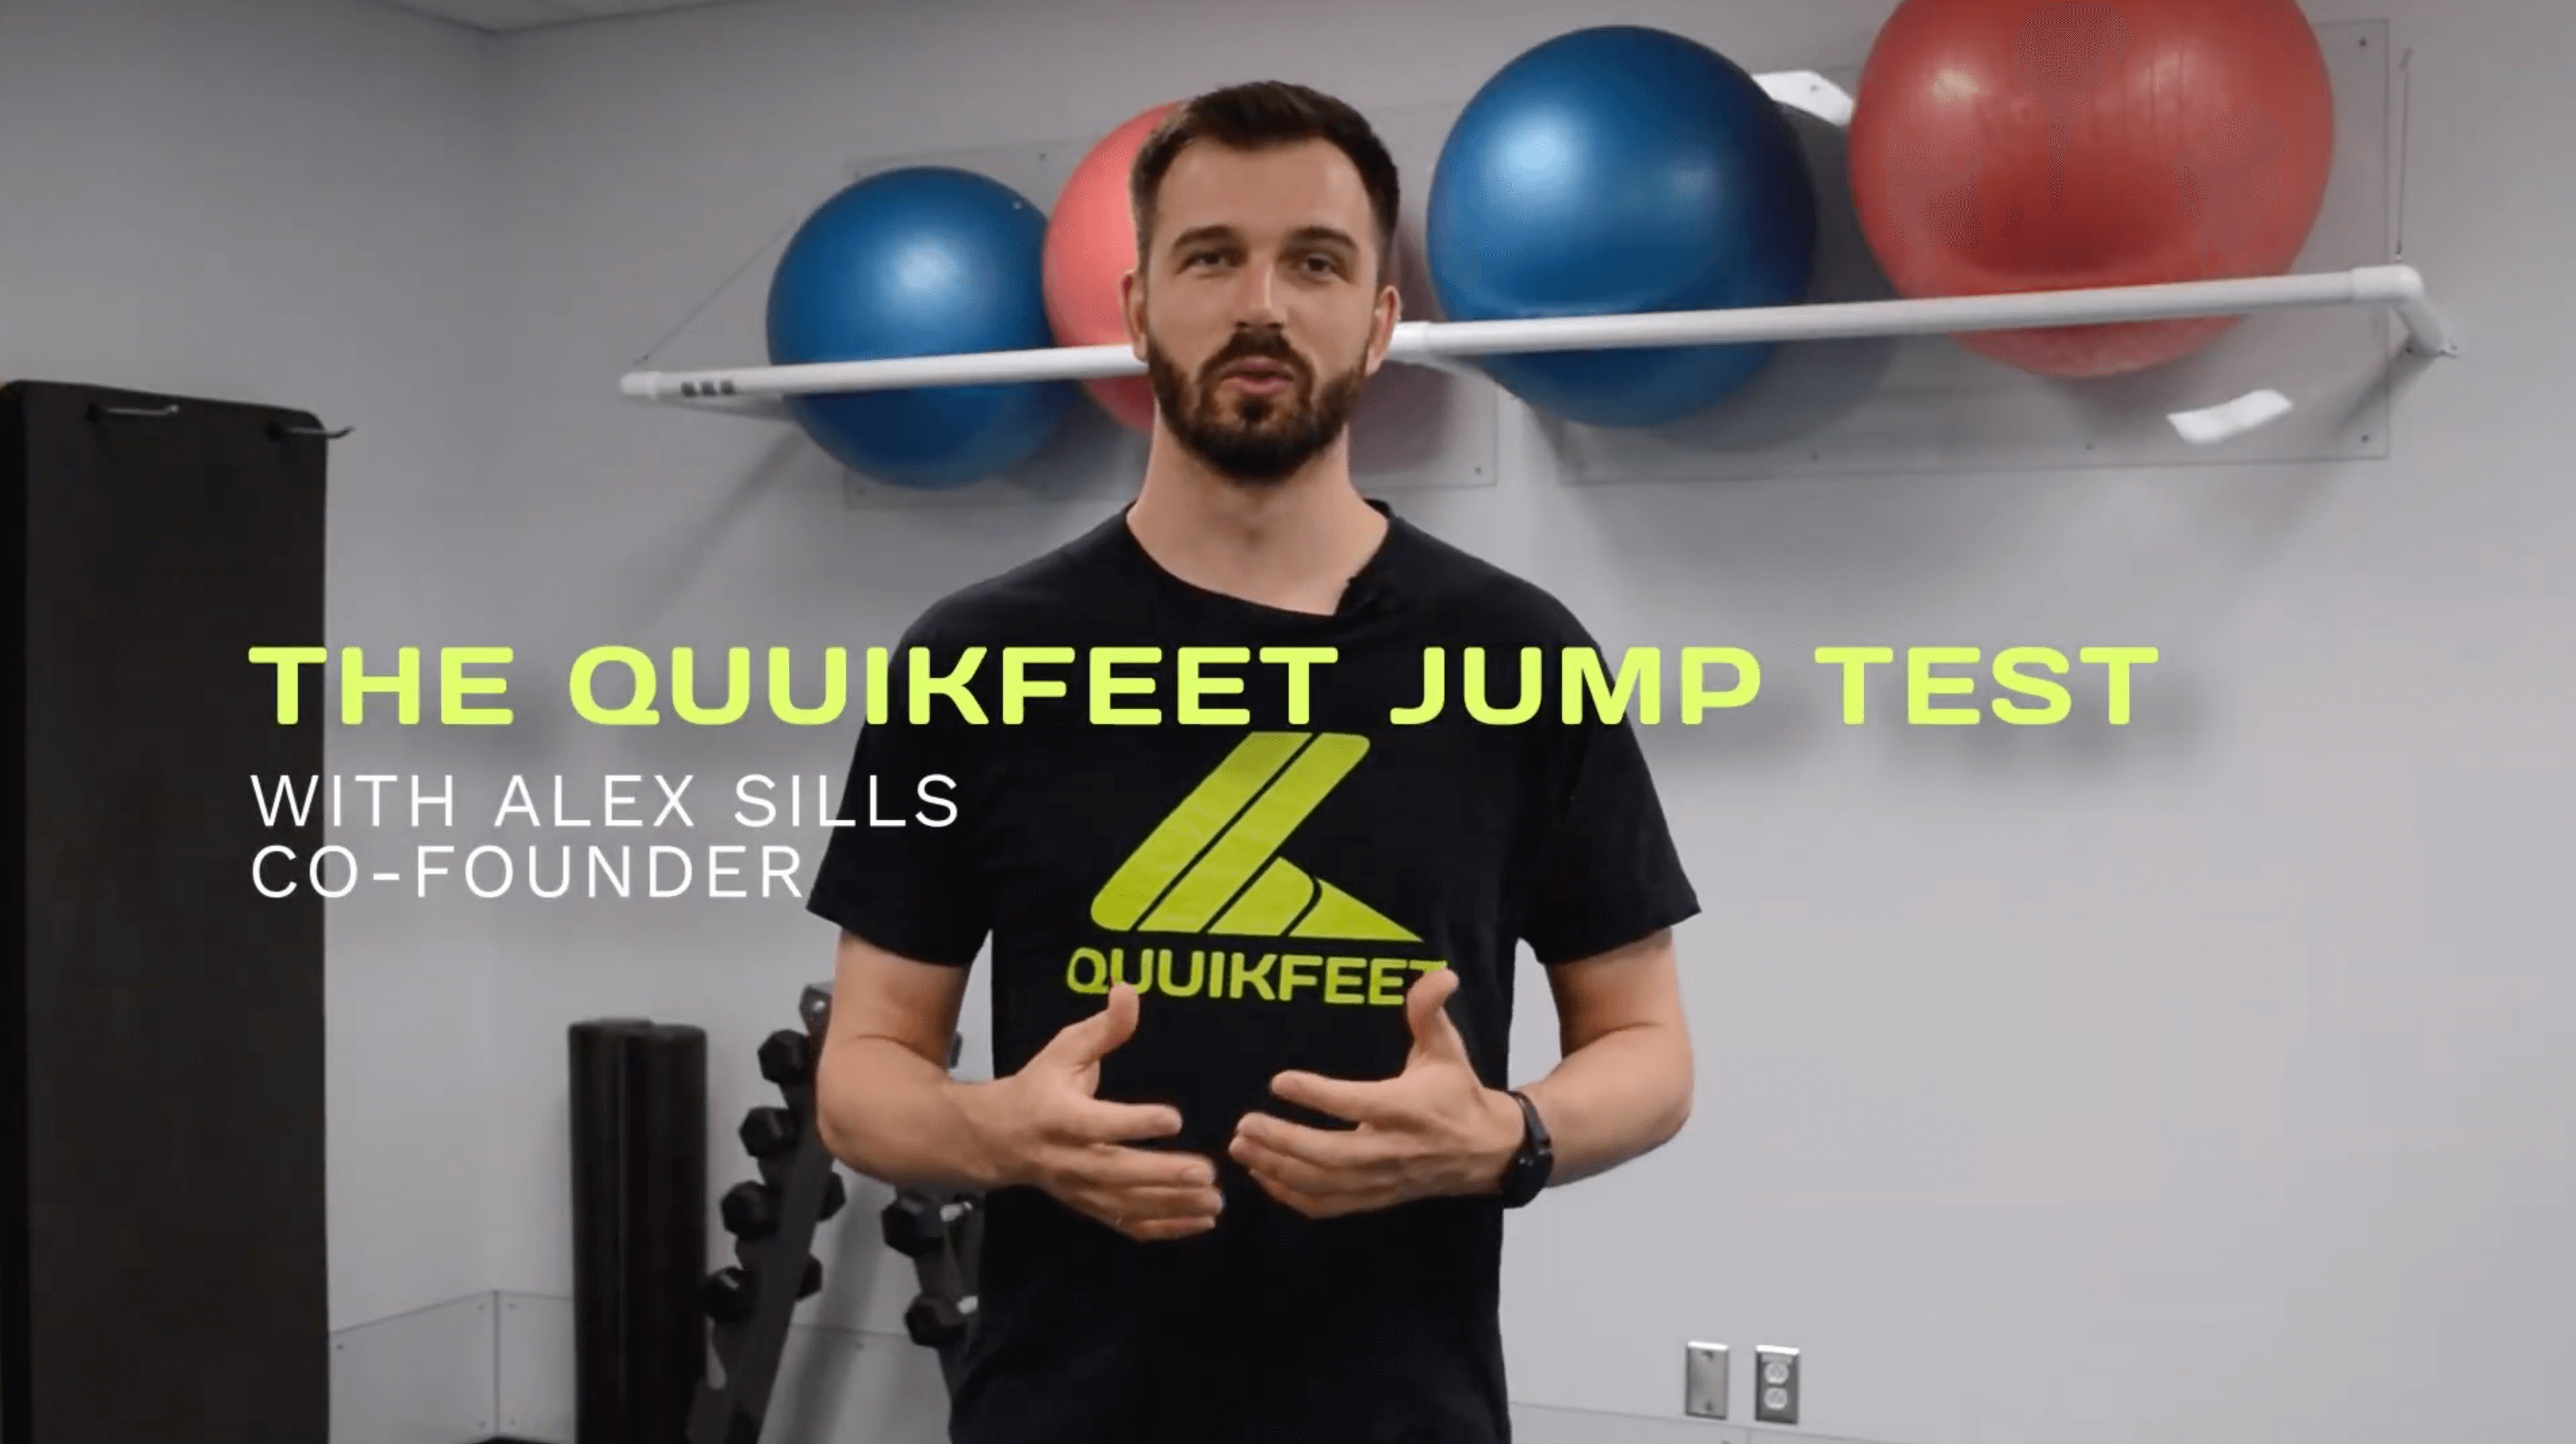 Charger la vidéo : Video explaining how to fit Quuikfeet in your skates.